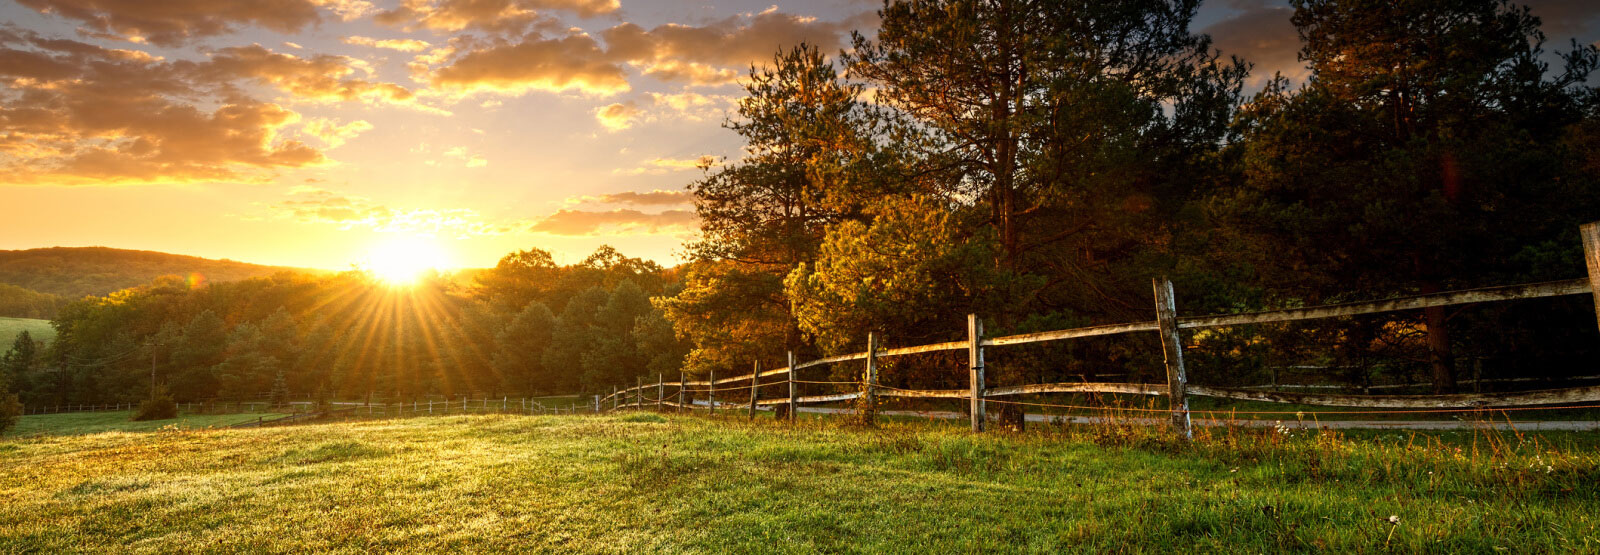 A landscape shot with an old wooden fence and sunset